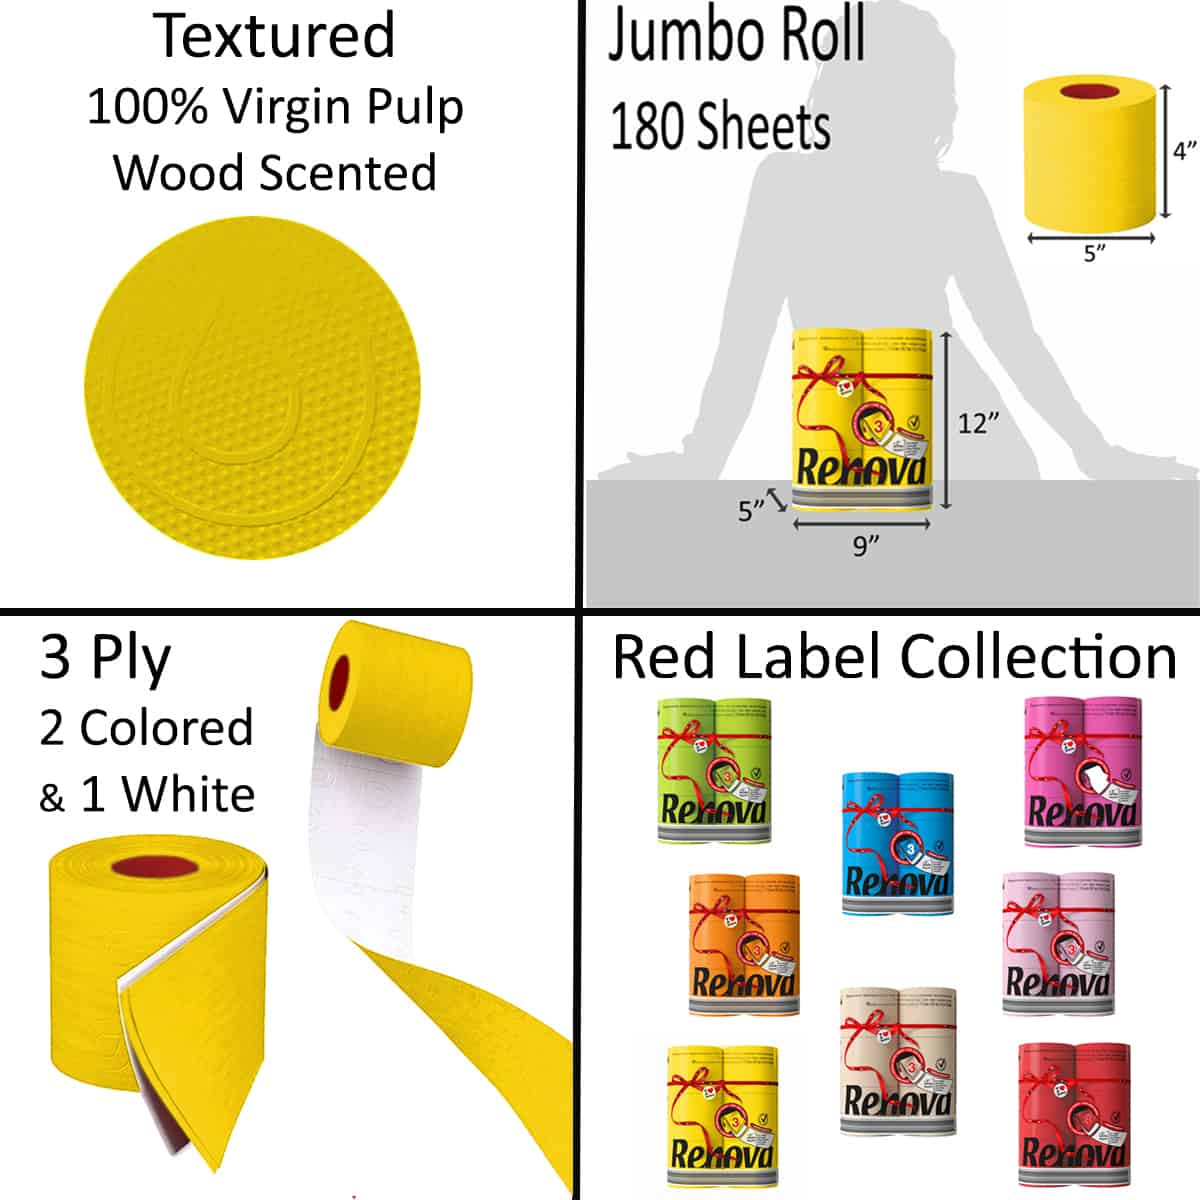 Luxury Scented Colored Toilet Paper 6 Jumbo Rolls 3-Ply-180 Sheets-Pallet 270 packs-1620R